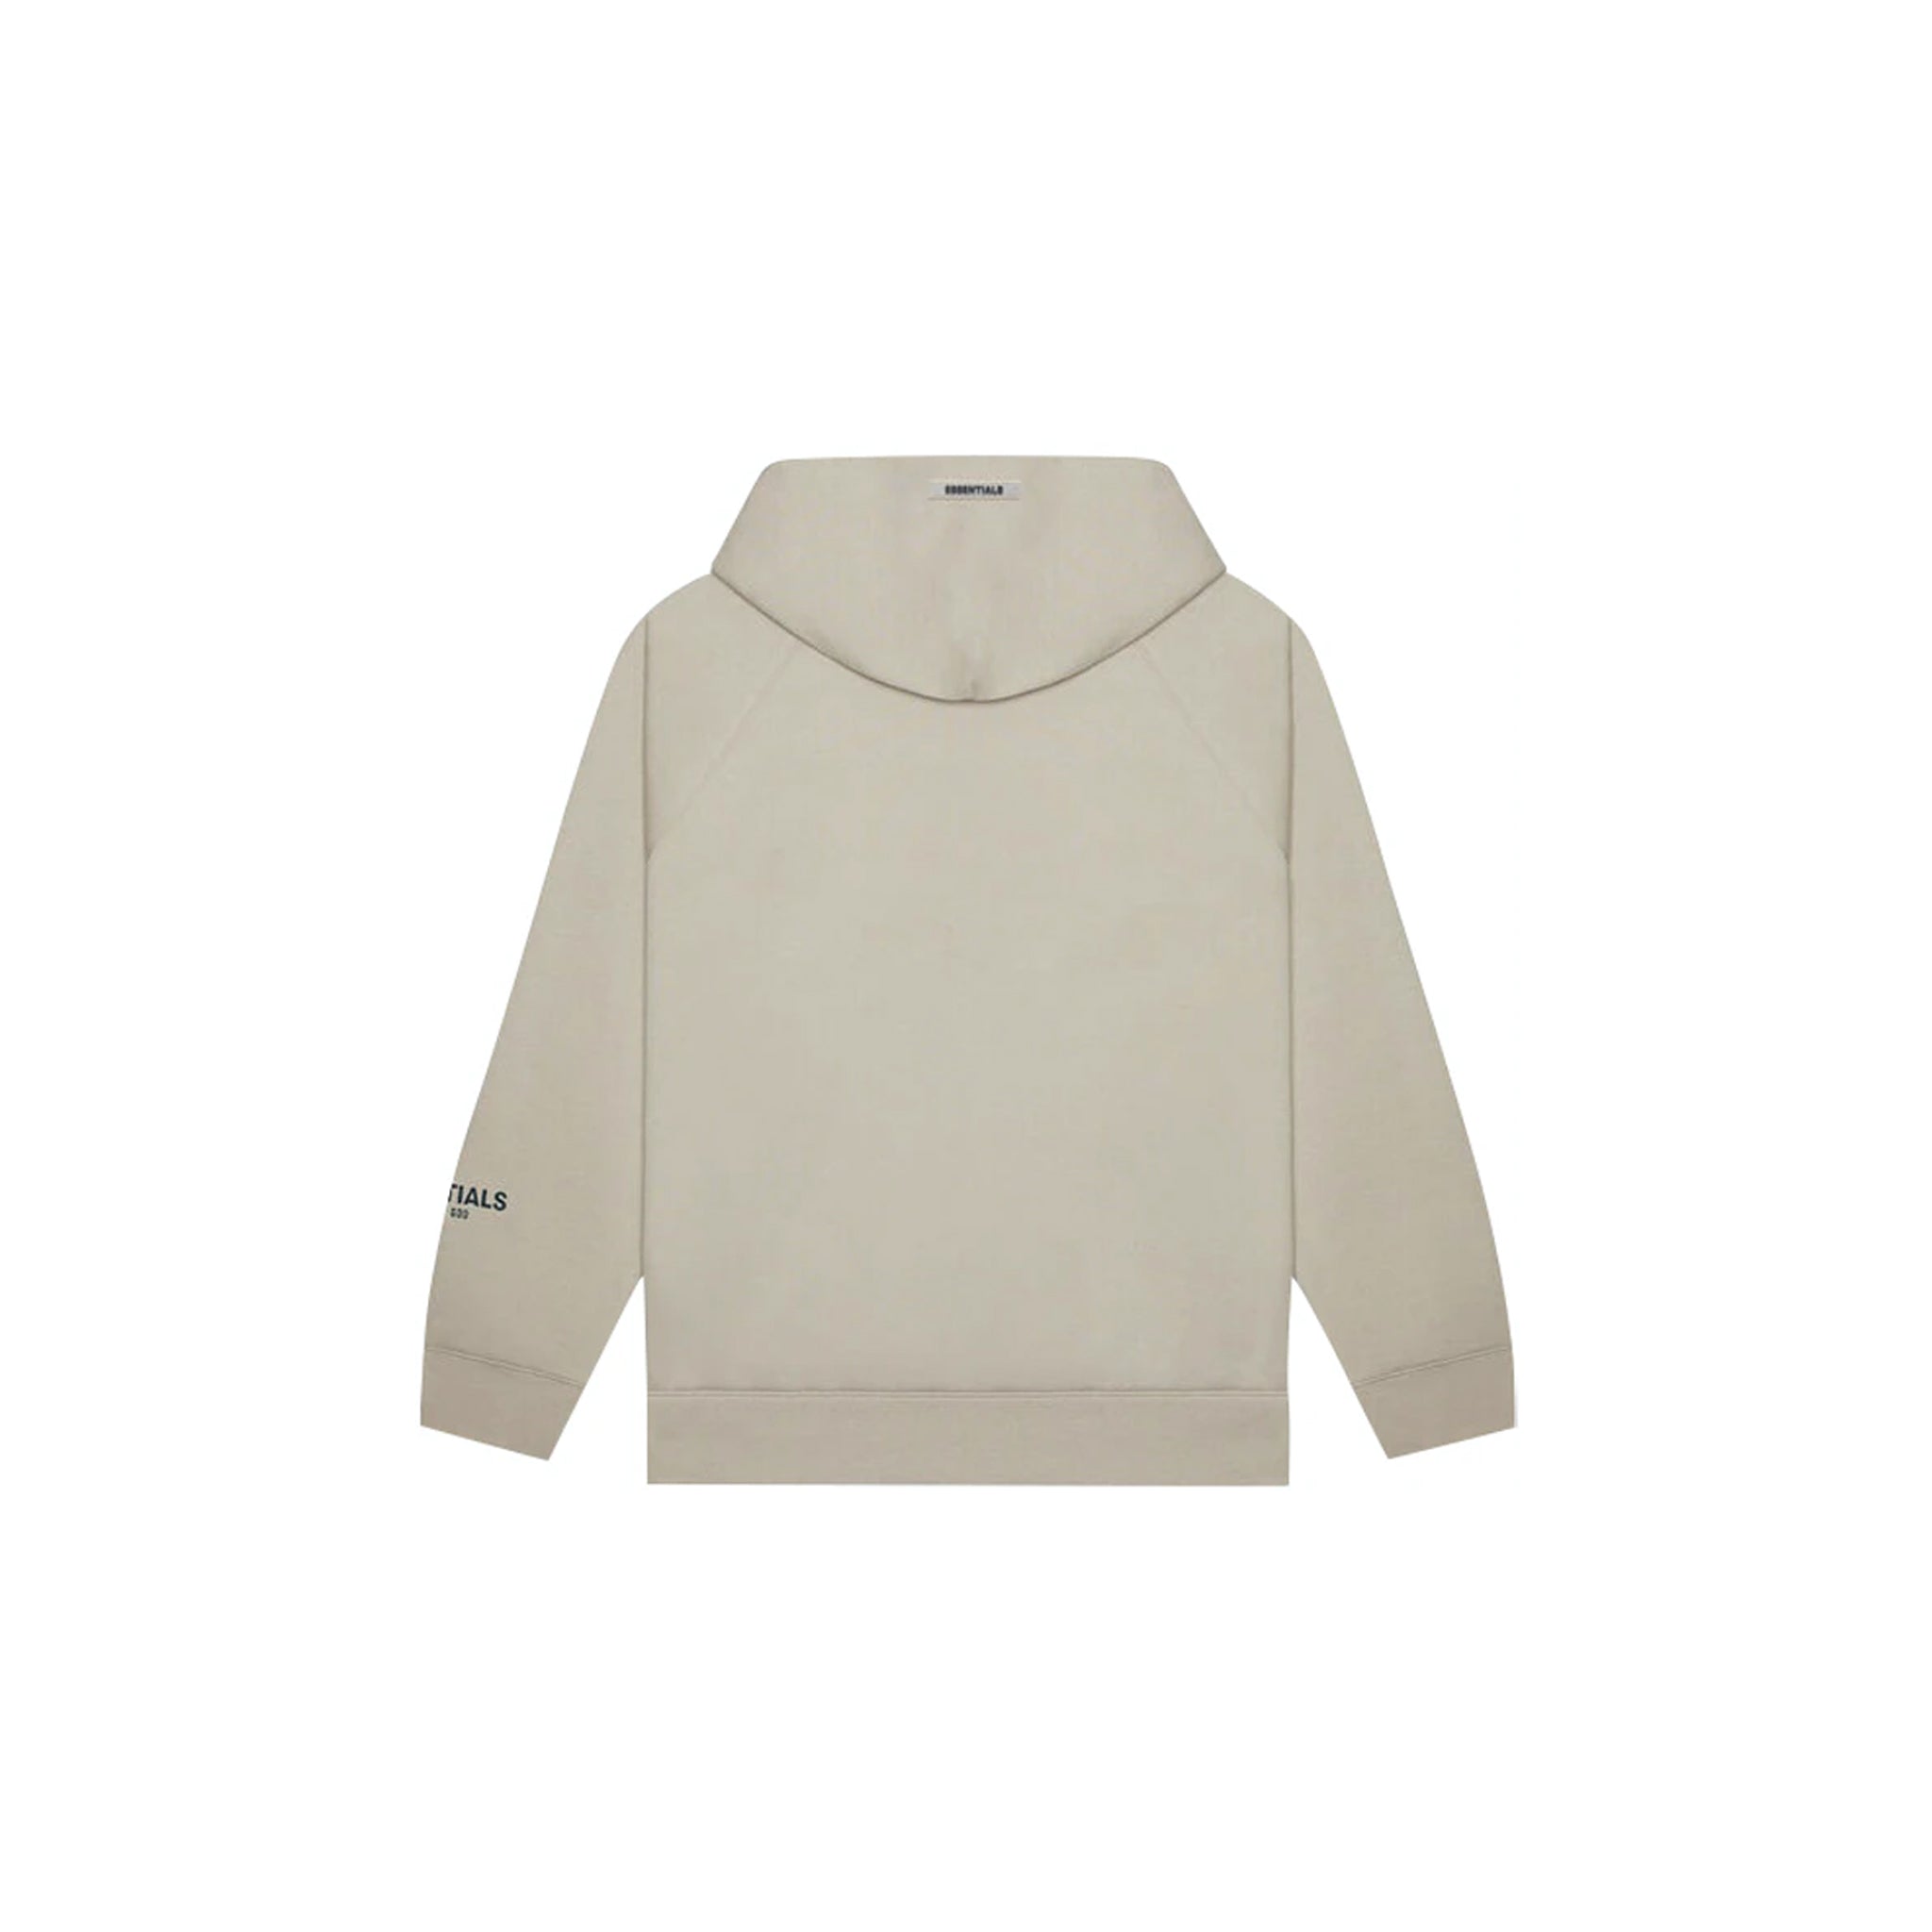 FEAR OF GOD ESSENTIALS PULLOVER HOODIE APPLIQUE LOGO (SS20) STRING